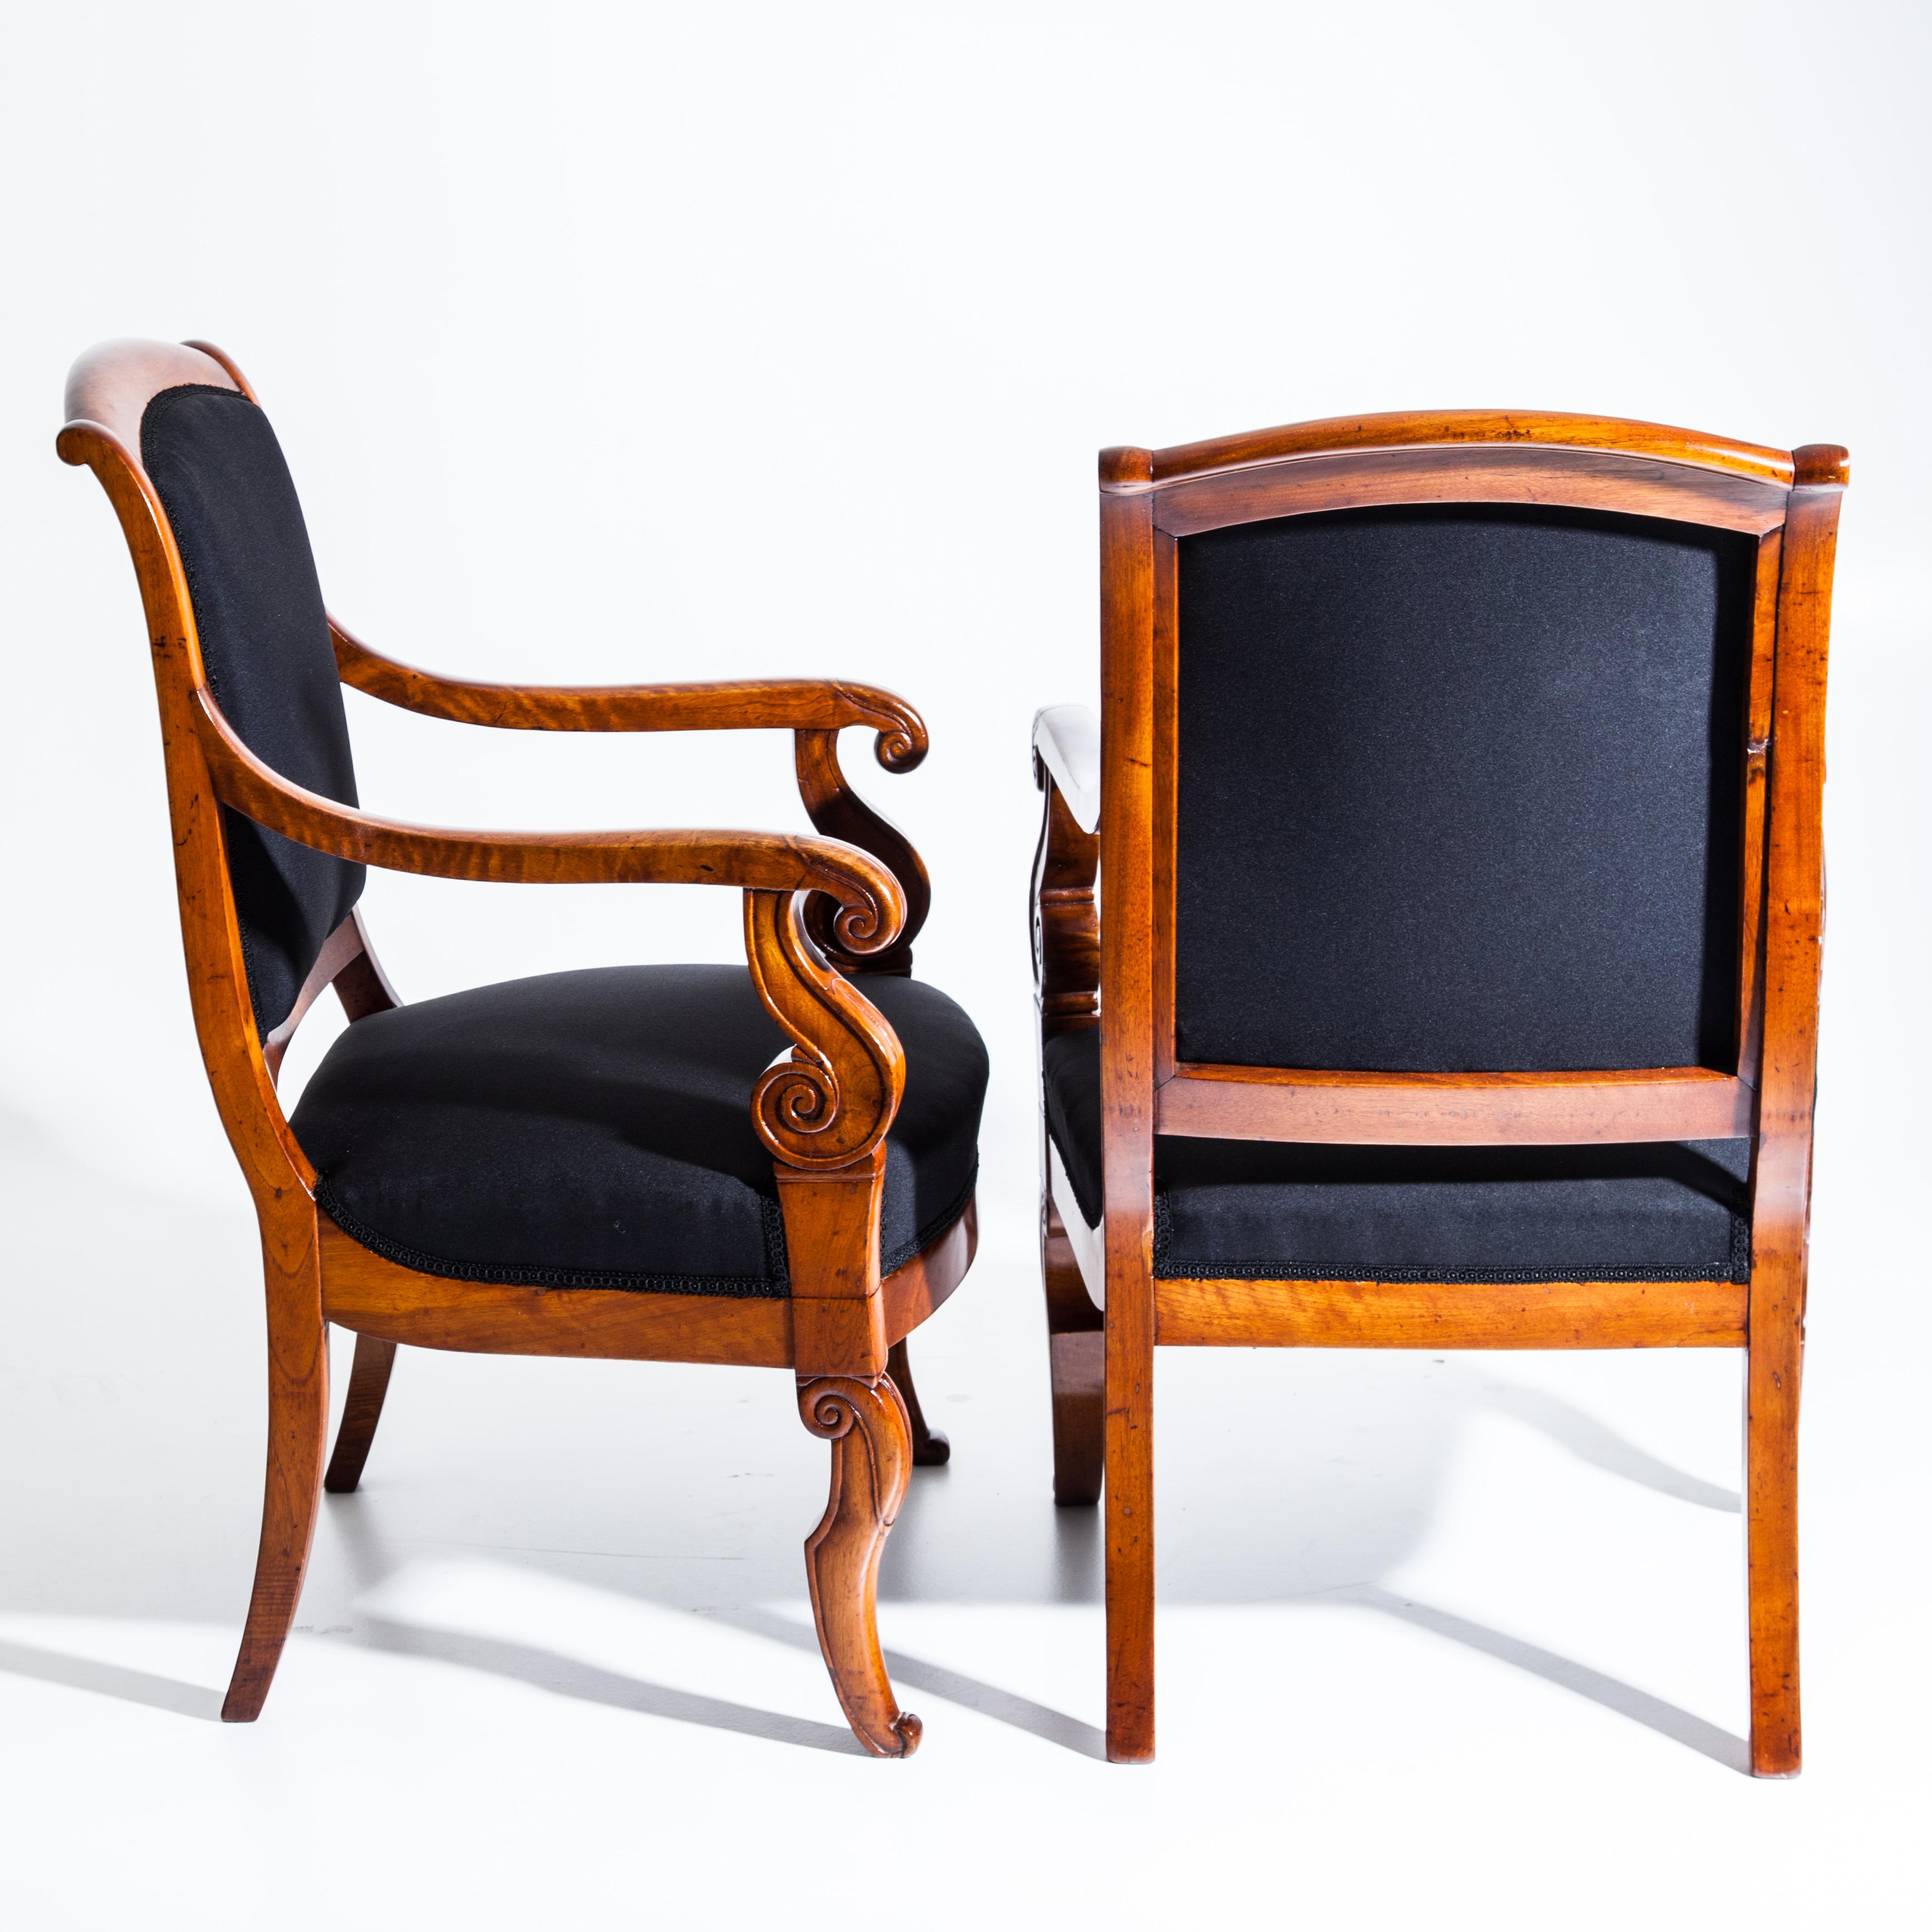 Pair of Cherrywood Armchairs, France, First Half of the 19th Century 3